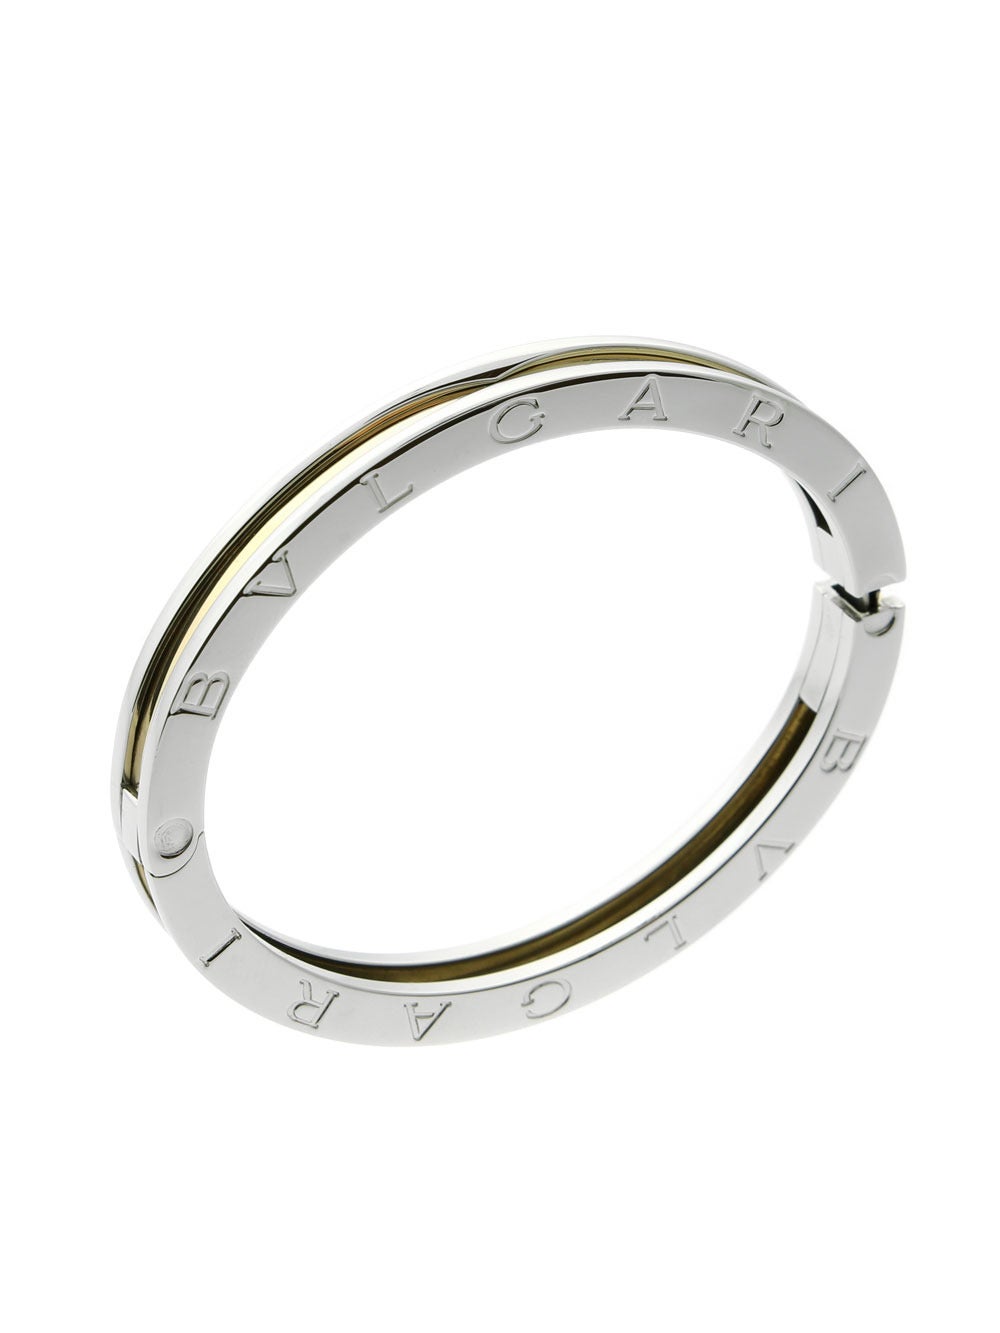 The chic bangle perfect for everyday wear by Bulgari from the legendary BZERO1 collection combines stainless steel and 18k yellow gold. The bangle measures 6.5MM Wide (.25″ Inches), and has a weight of 25 grams.